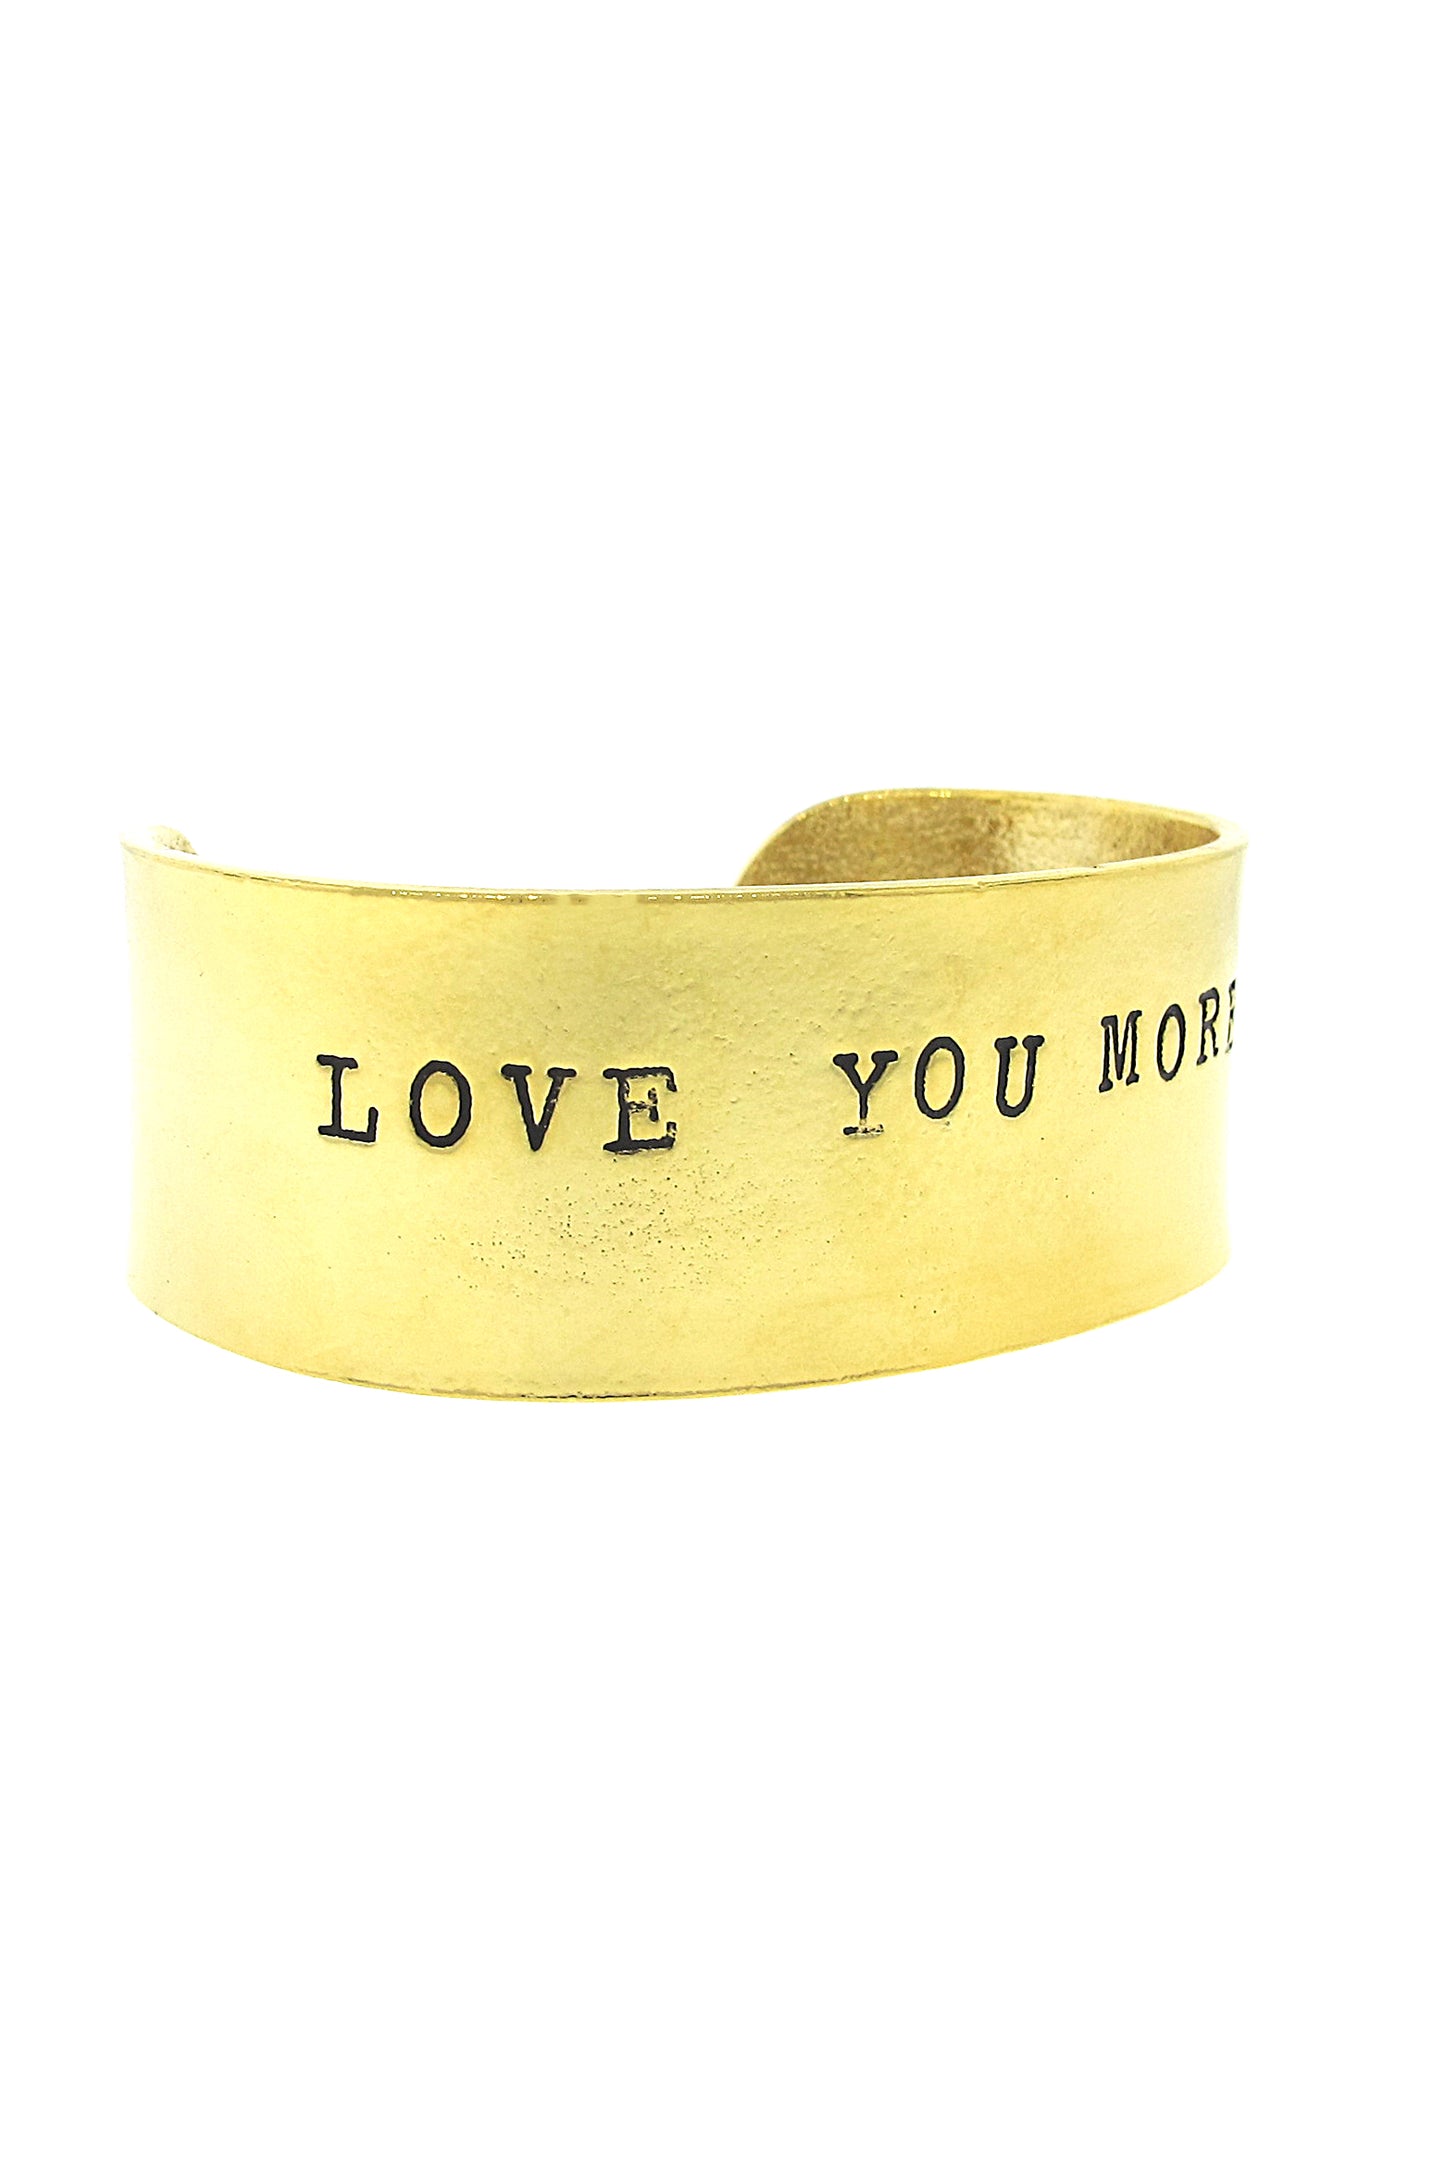 Love You More Hand Stamped Gold Cuff Bracelet